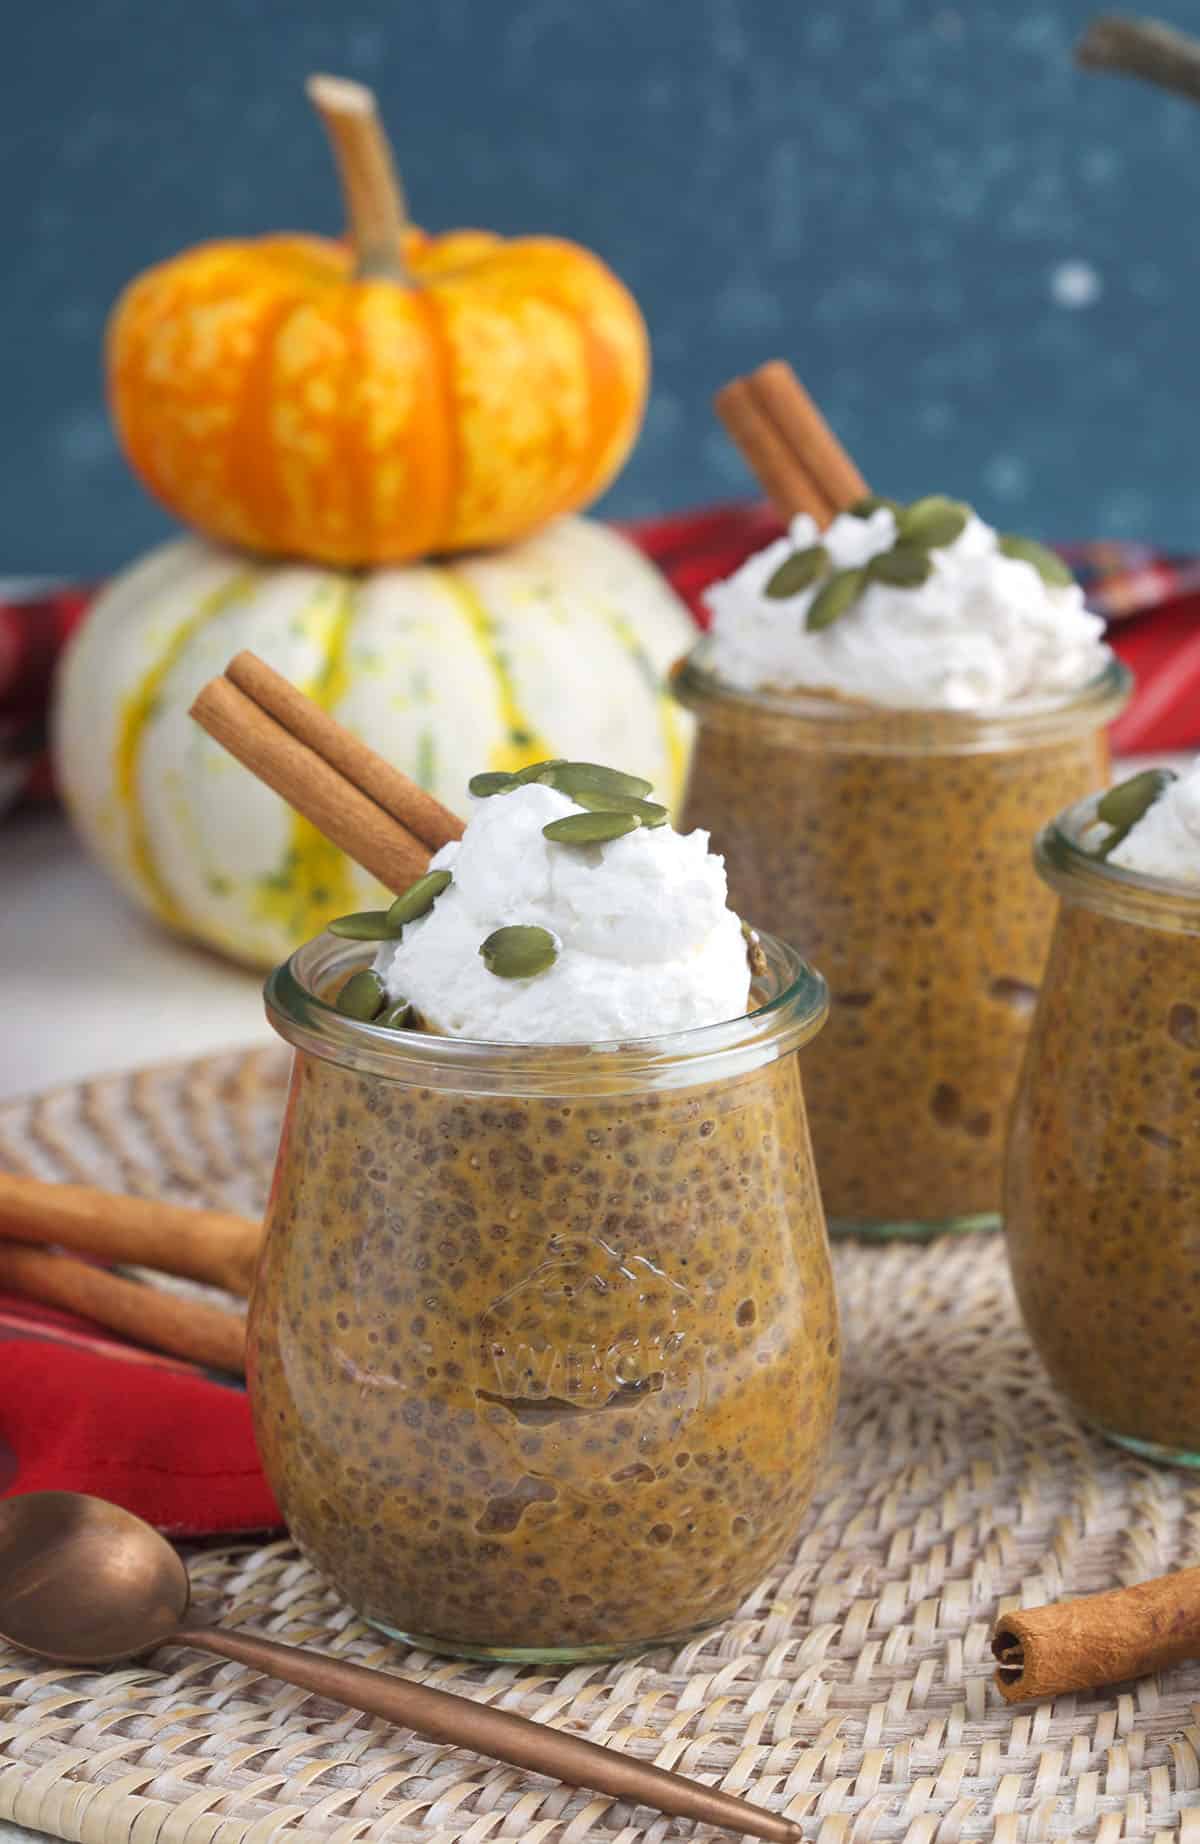 Pumpkins are stacked behind chia pudding.